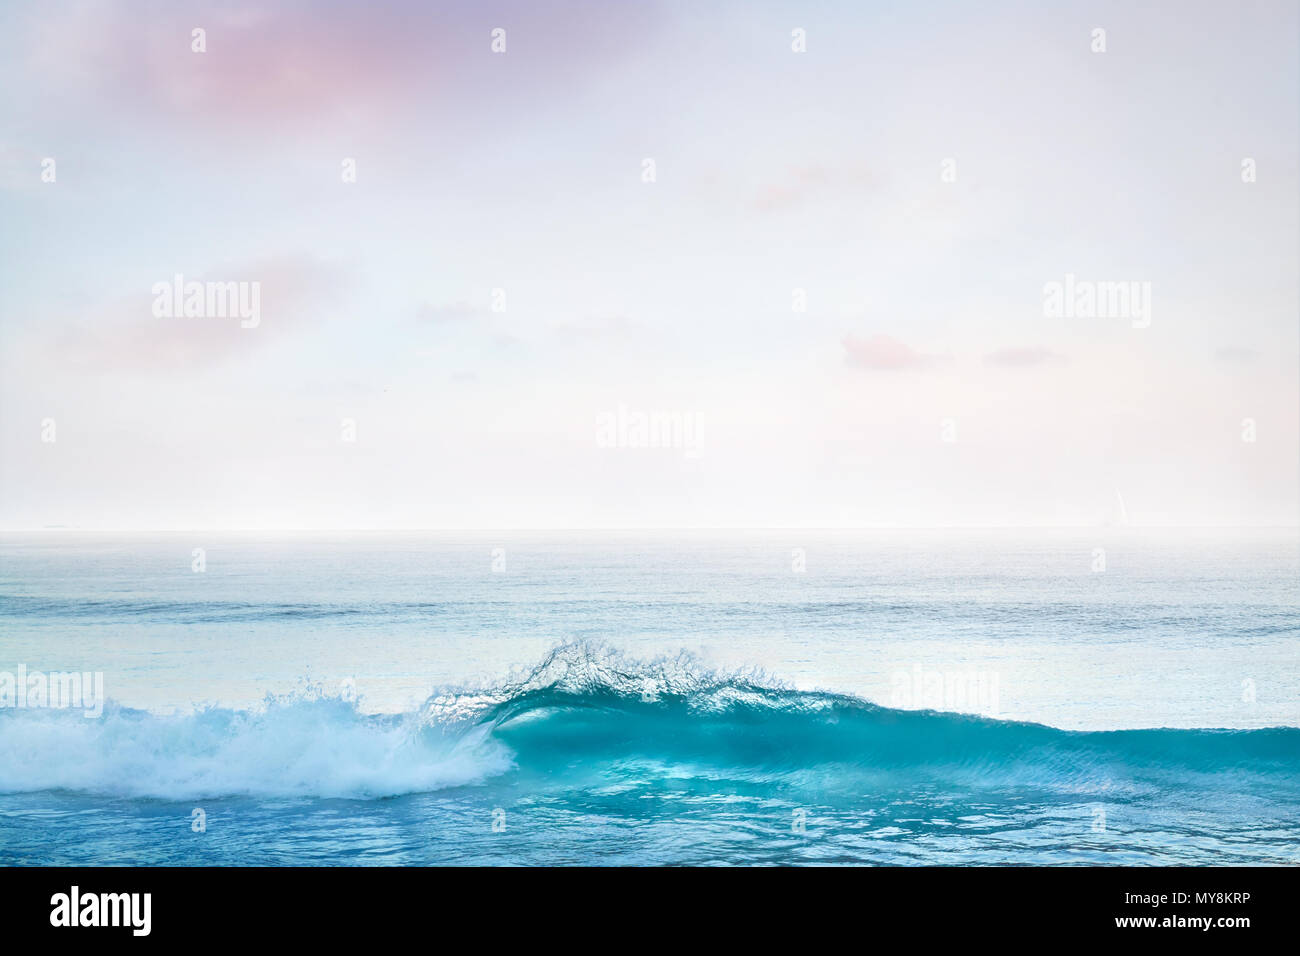 Picturesque ocean with a breaking wave Stock Photo